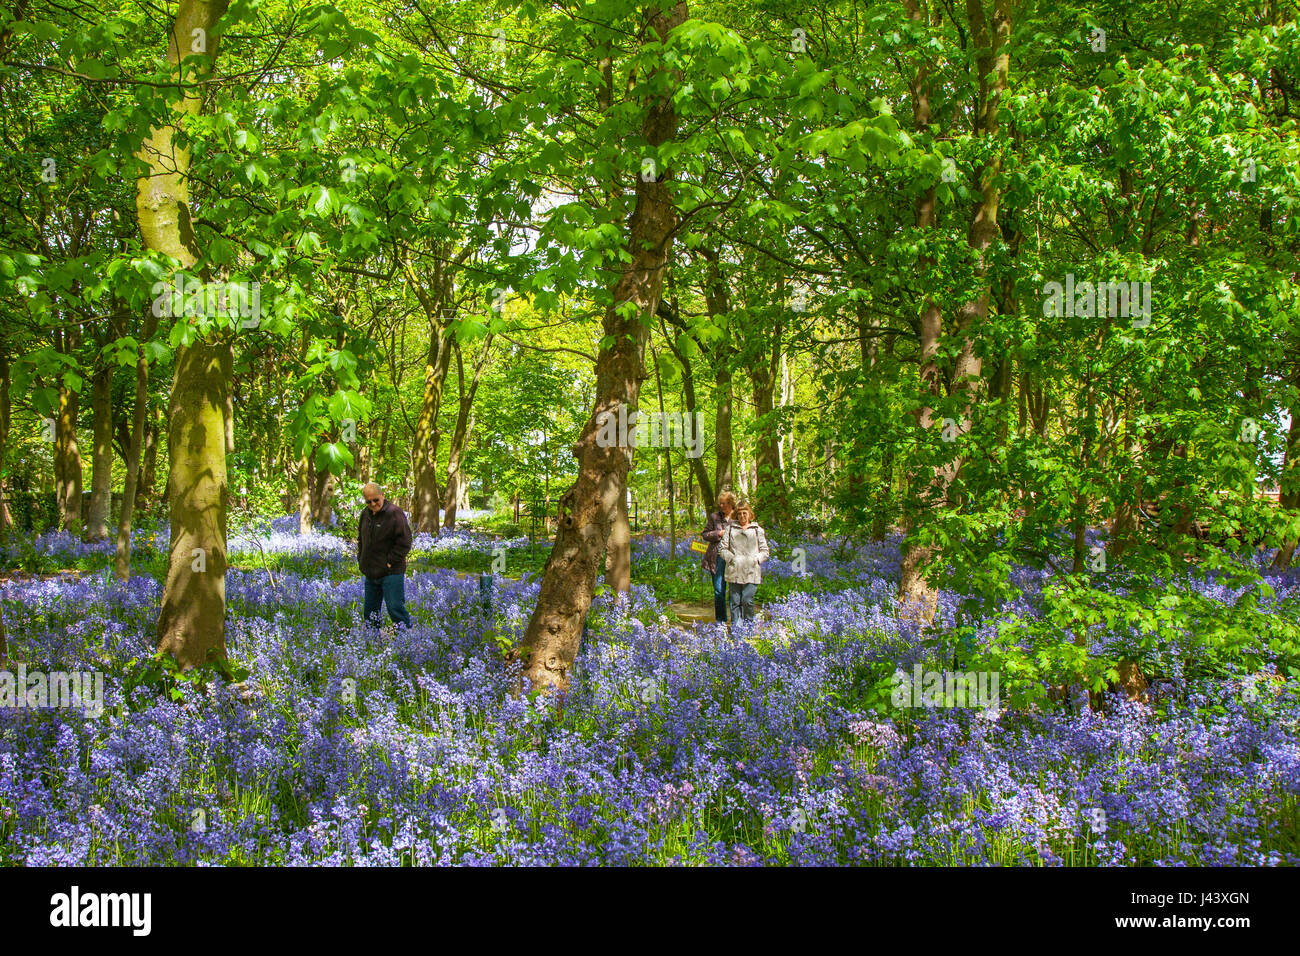 Woman exploring British flowering bluebell woodland in Warton Hall Gardens, Fylde, UK. May, 2017. Sunny spring day, if a little cold, as visitors explore among the fantastic array of spring bluebells. Bluebell woods where this favourite flower is incorporated into formal planting. Warton Hall is a Georgian Manor House set in 4 acres of garden with a beautiful bluebell woodland walk. Once owned by Augustus Wyckham Clifton of the Clifton family of Lytham, Lancashire. Stock Photo